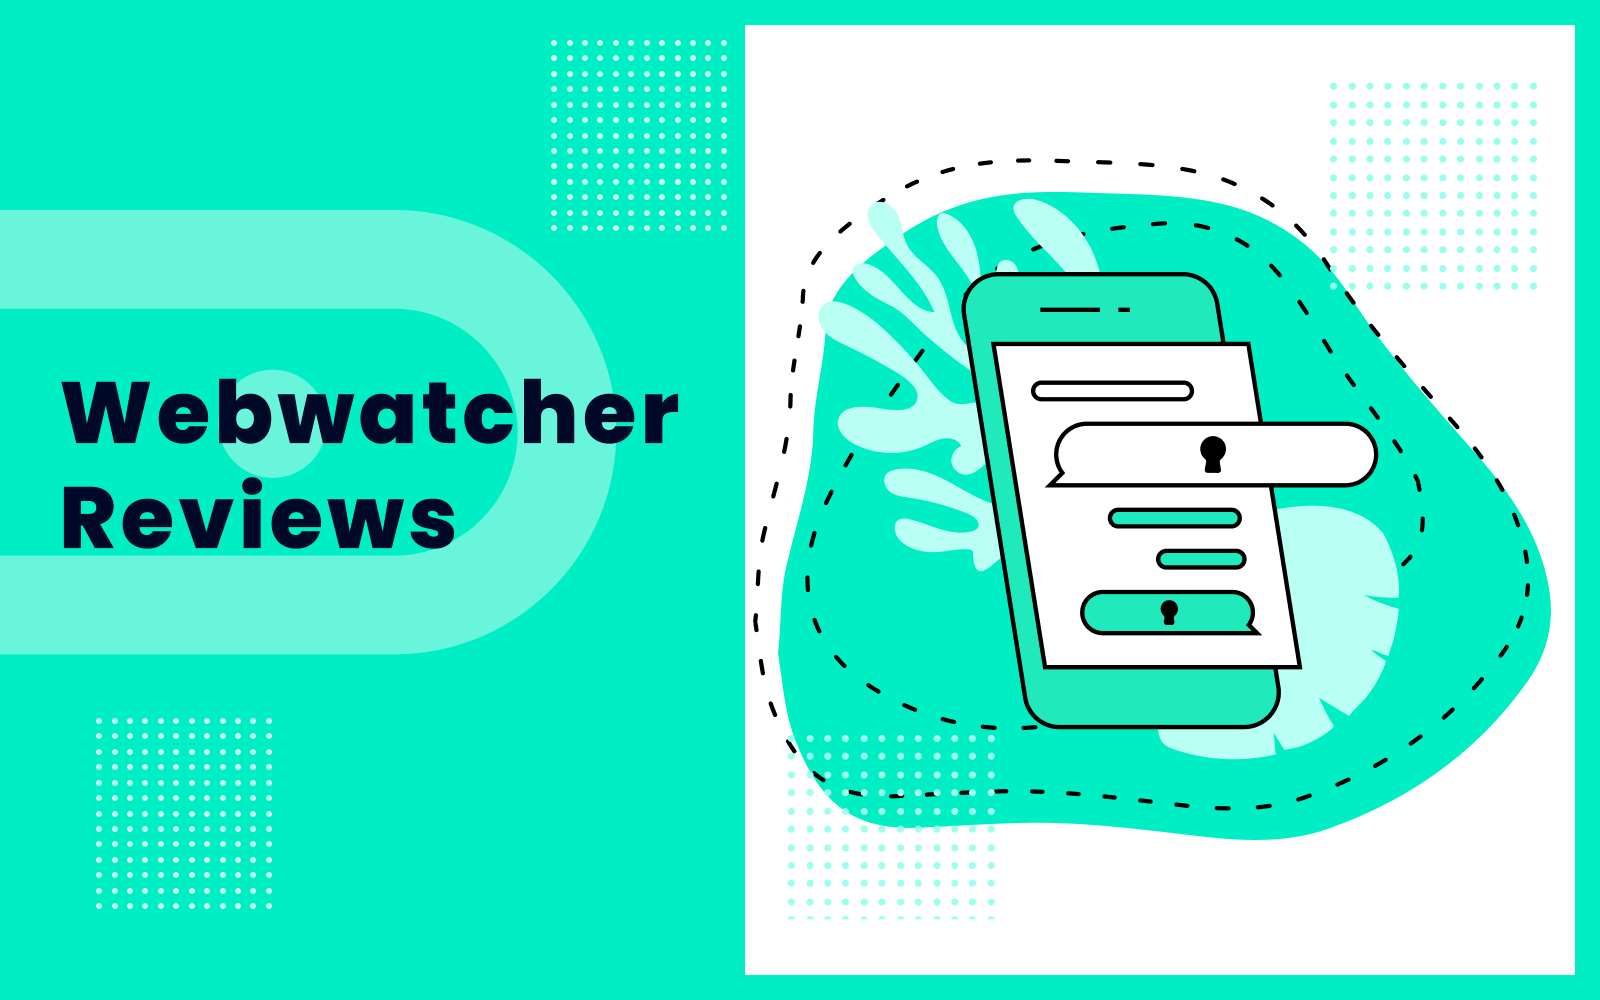 
Webwatcher Reviews 2022: Here Is What You Need to Know
